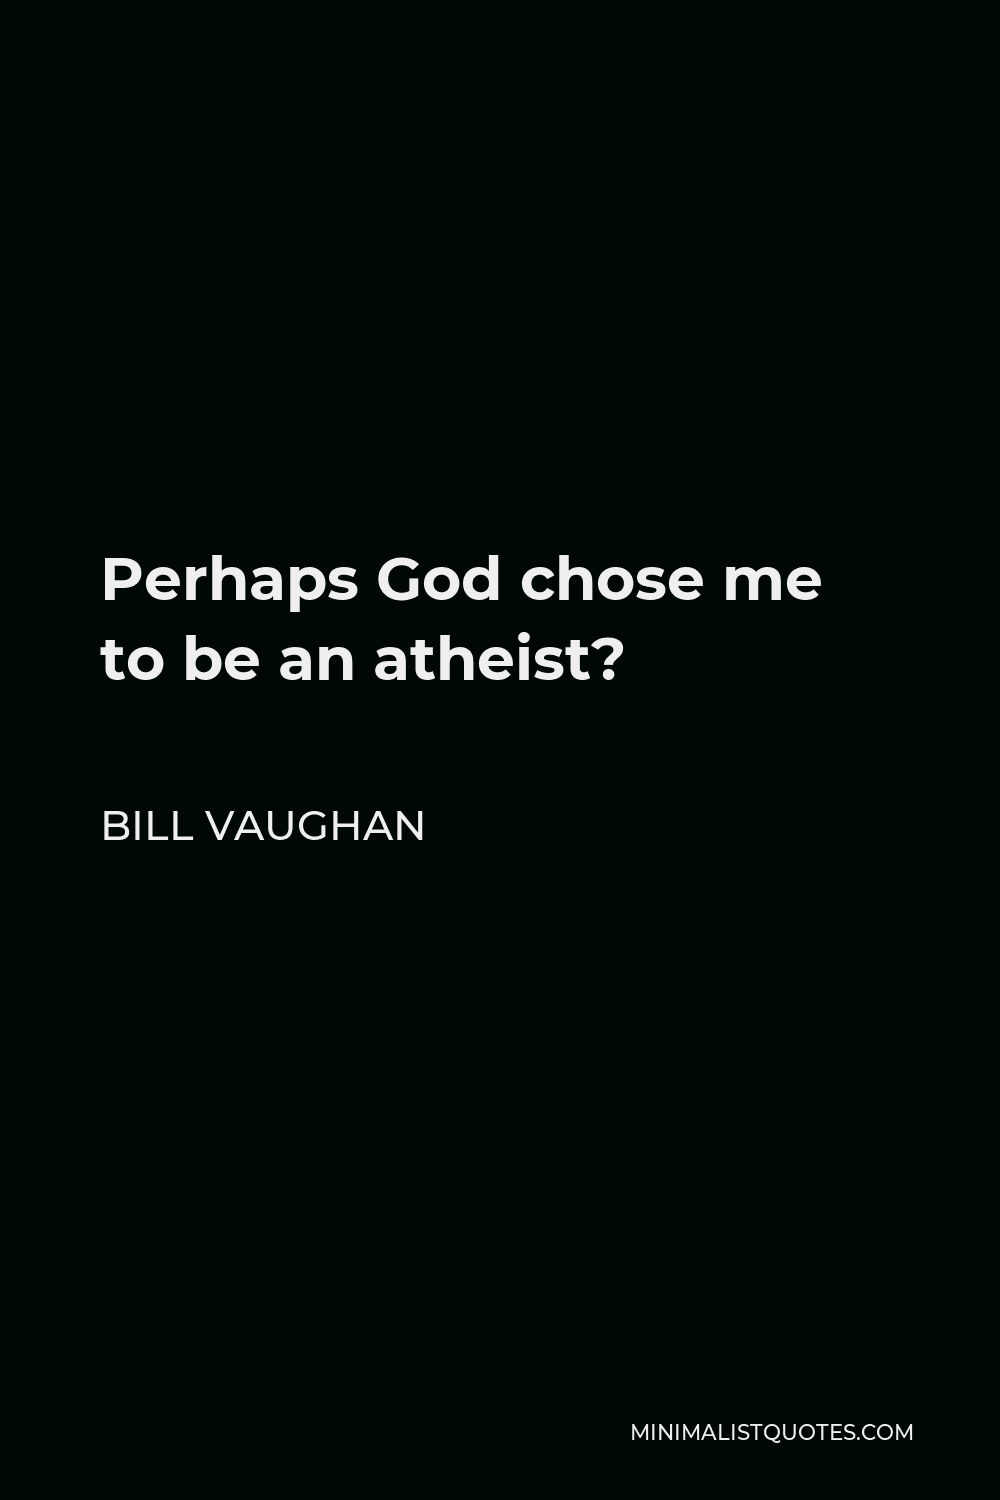 Bill Vaughan Quote - Perhaps God chose me to be an atheist?